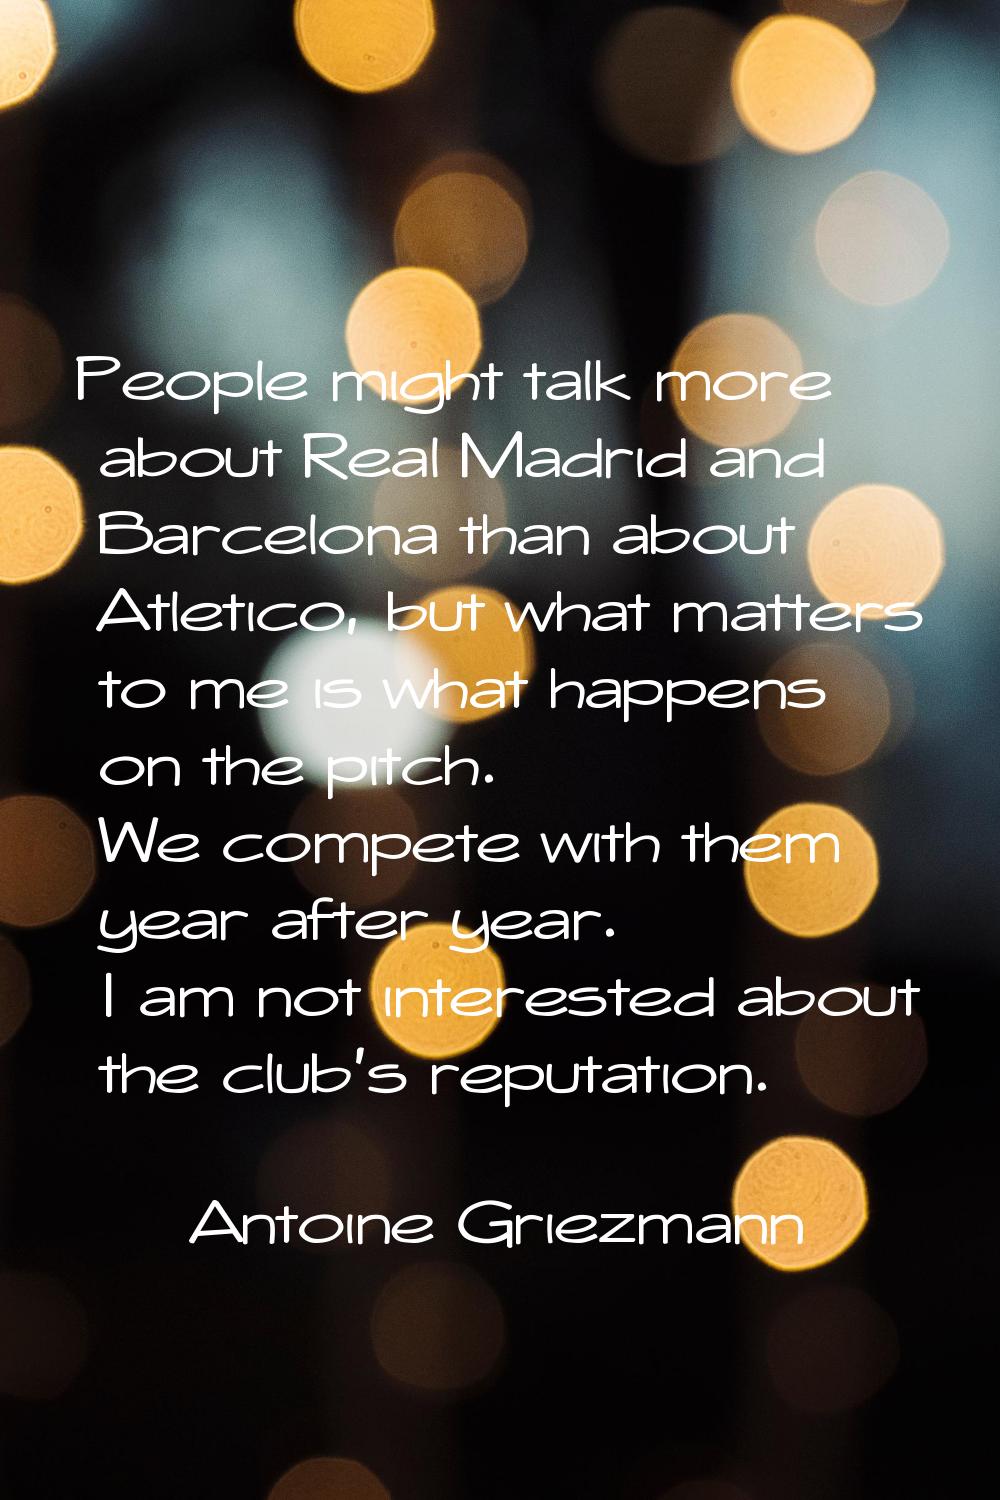 People might talk more about Real Madrid and Barcelona than about Atletico, but what matters to me 